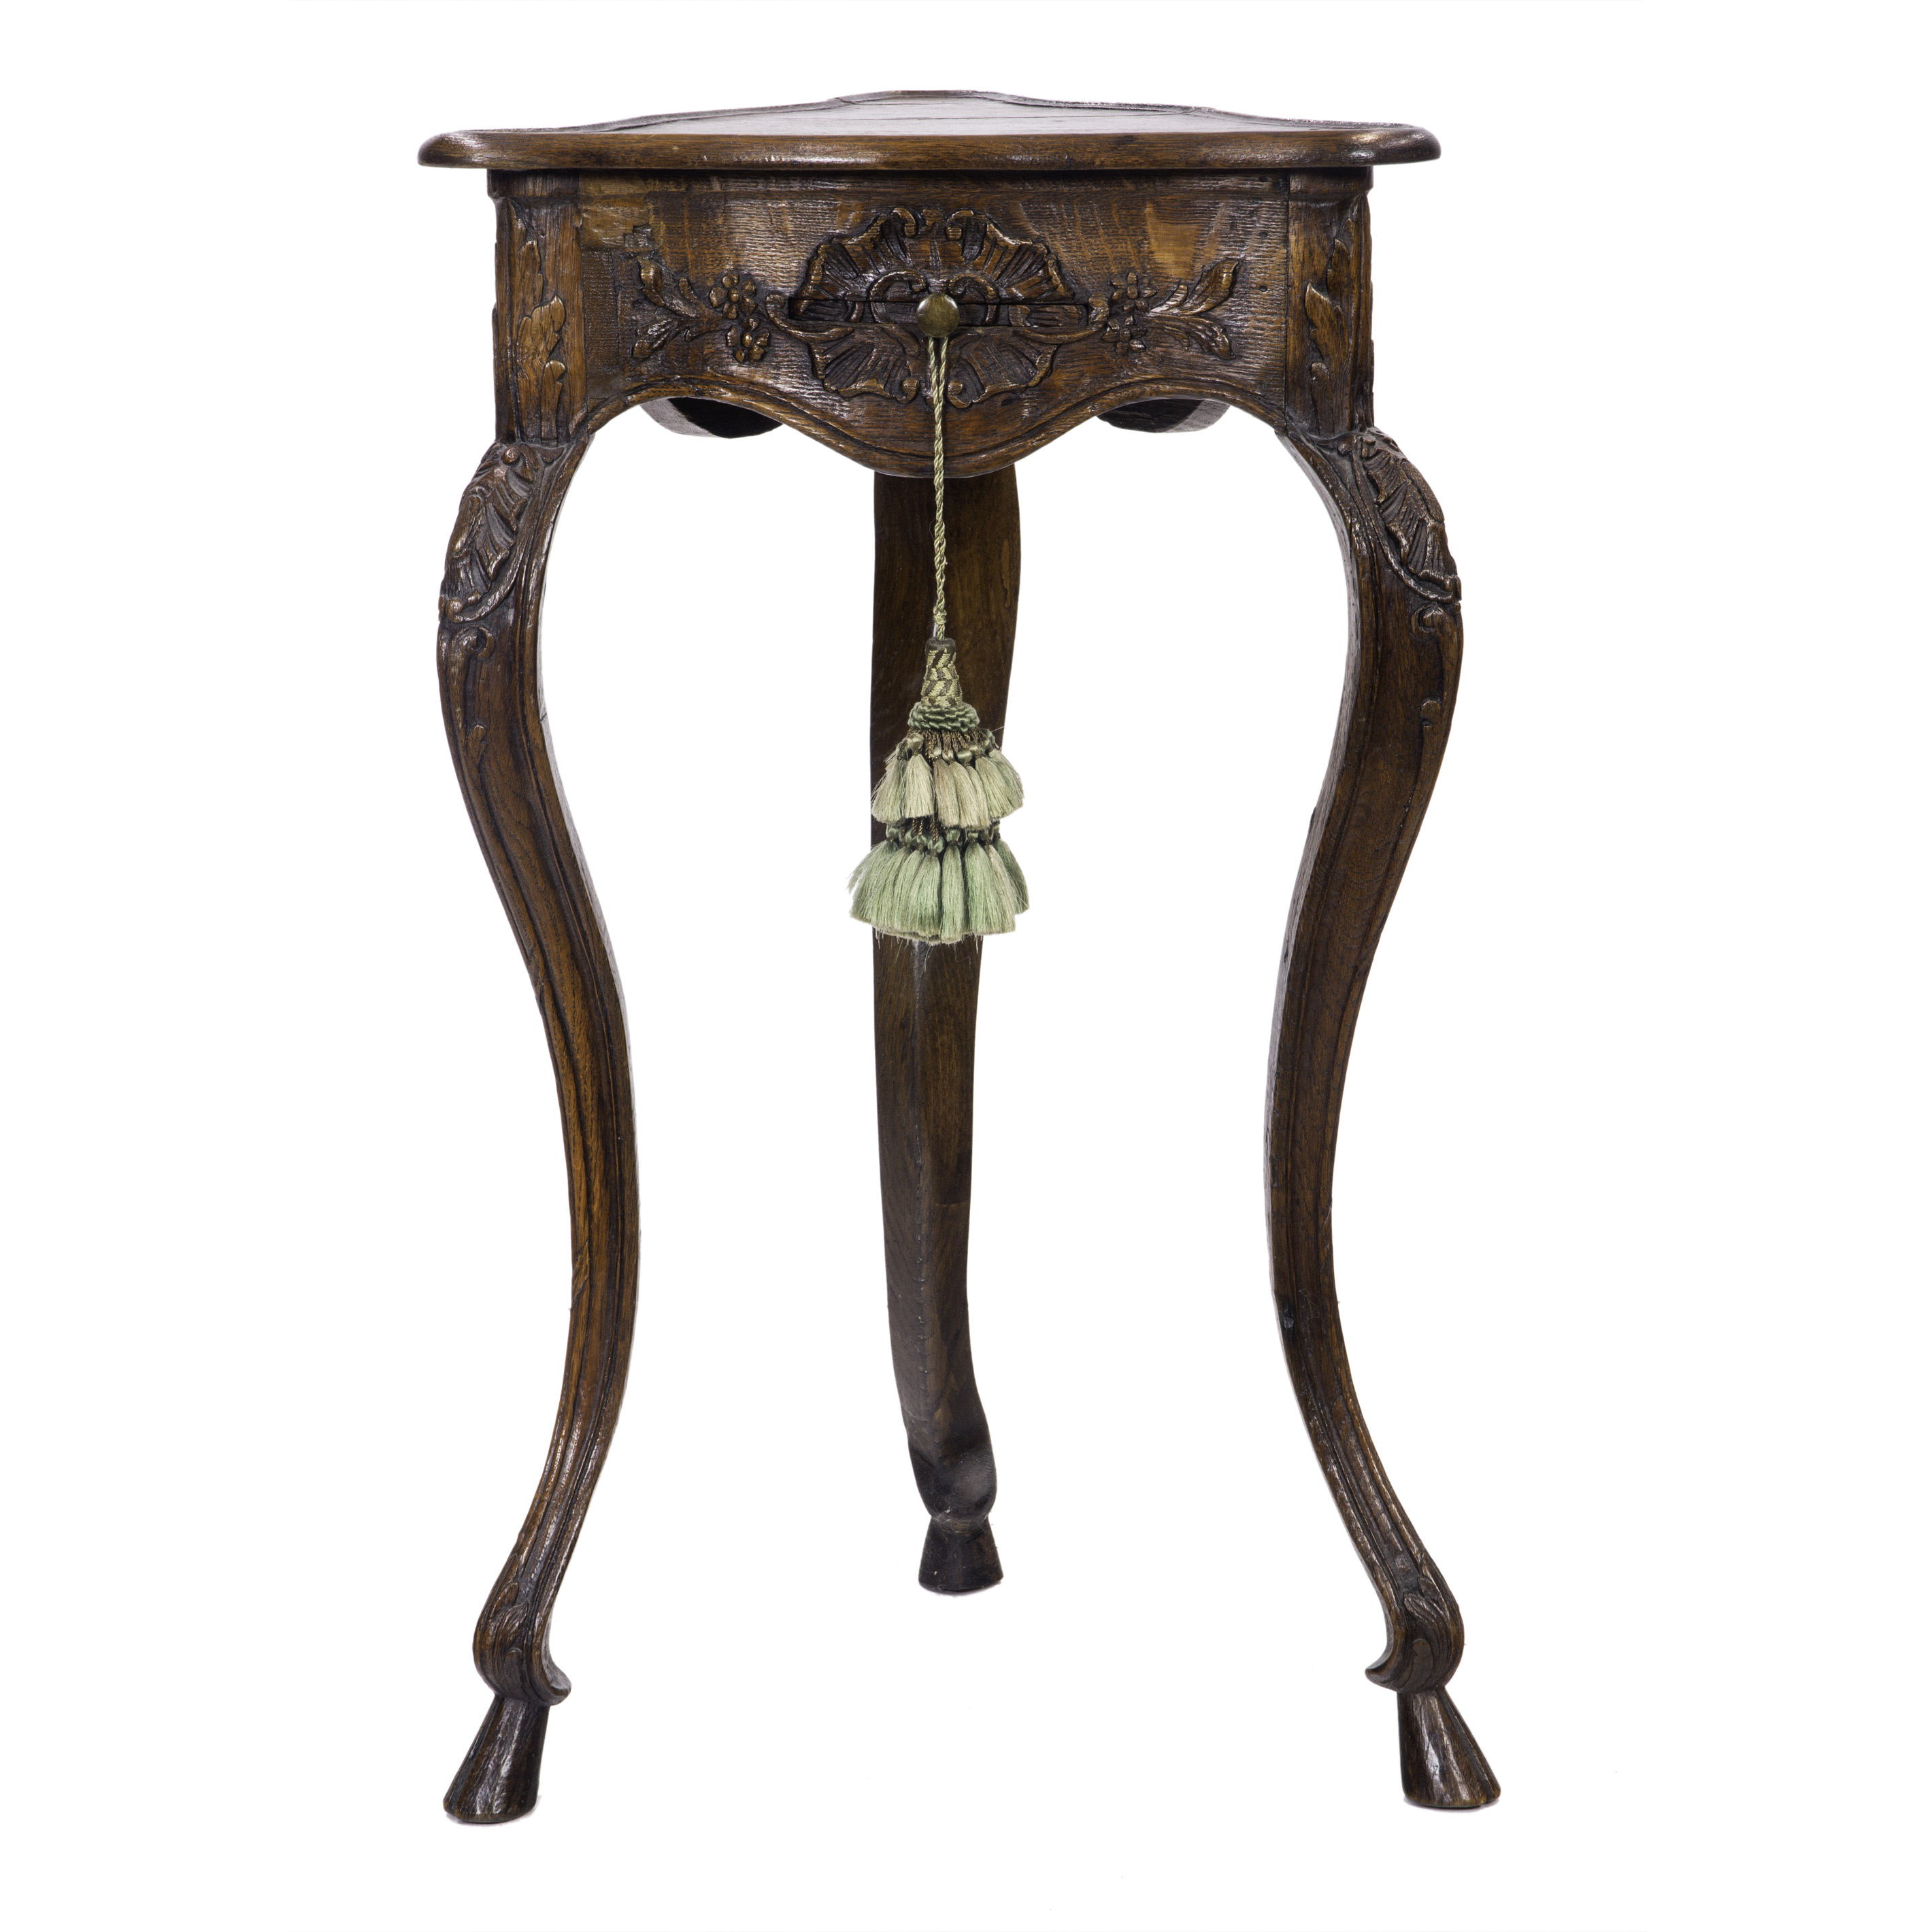 LOUIS XV STYLE OCCASIONAL TABLE 3a4297